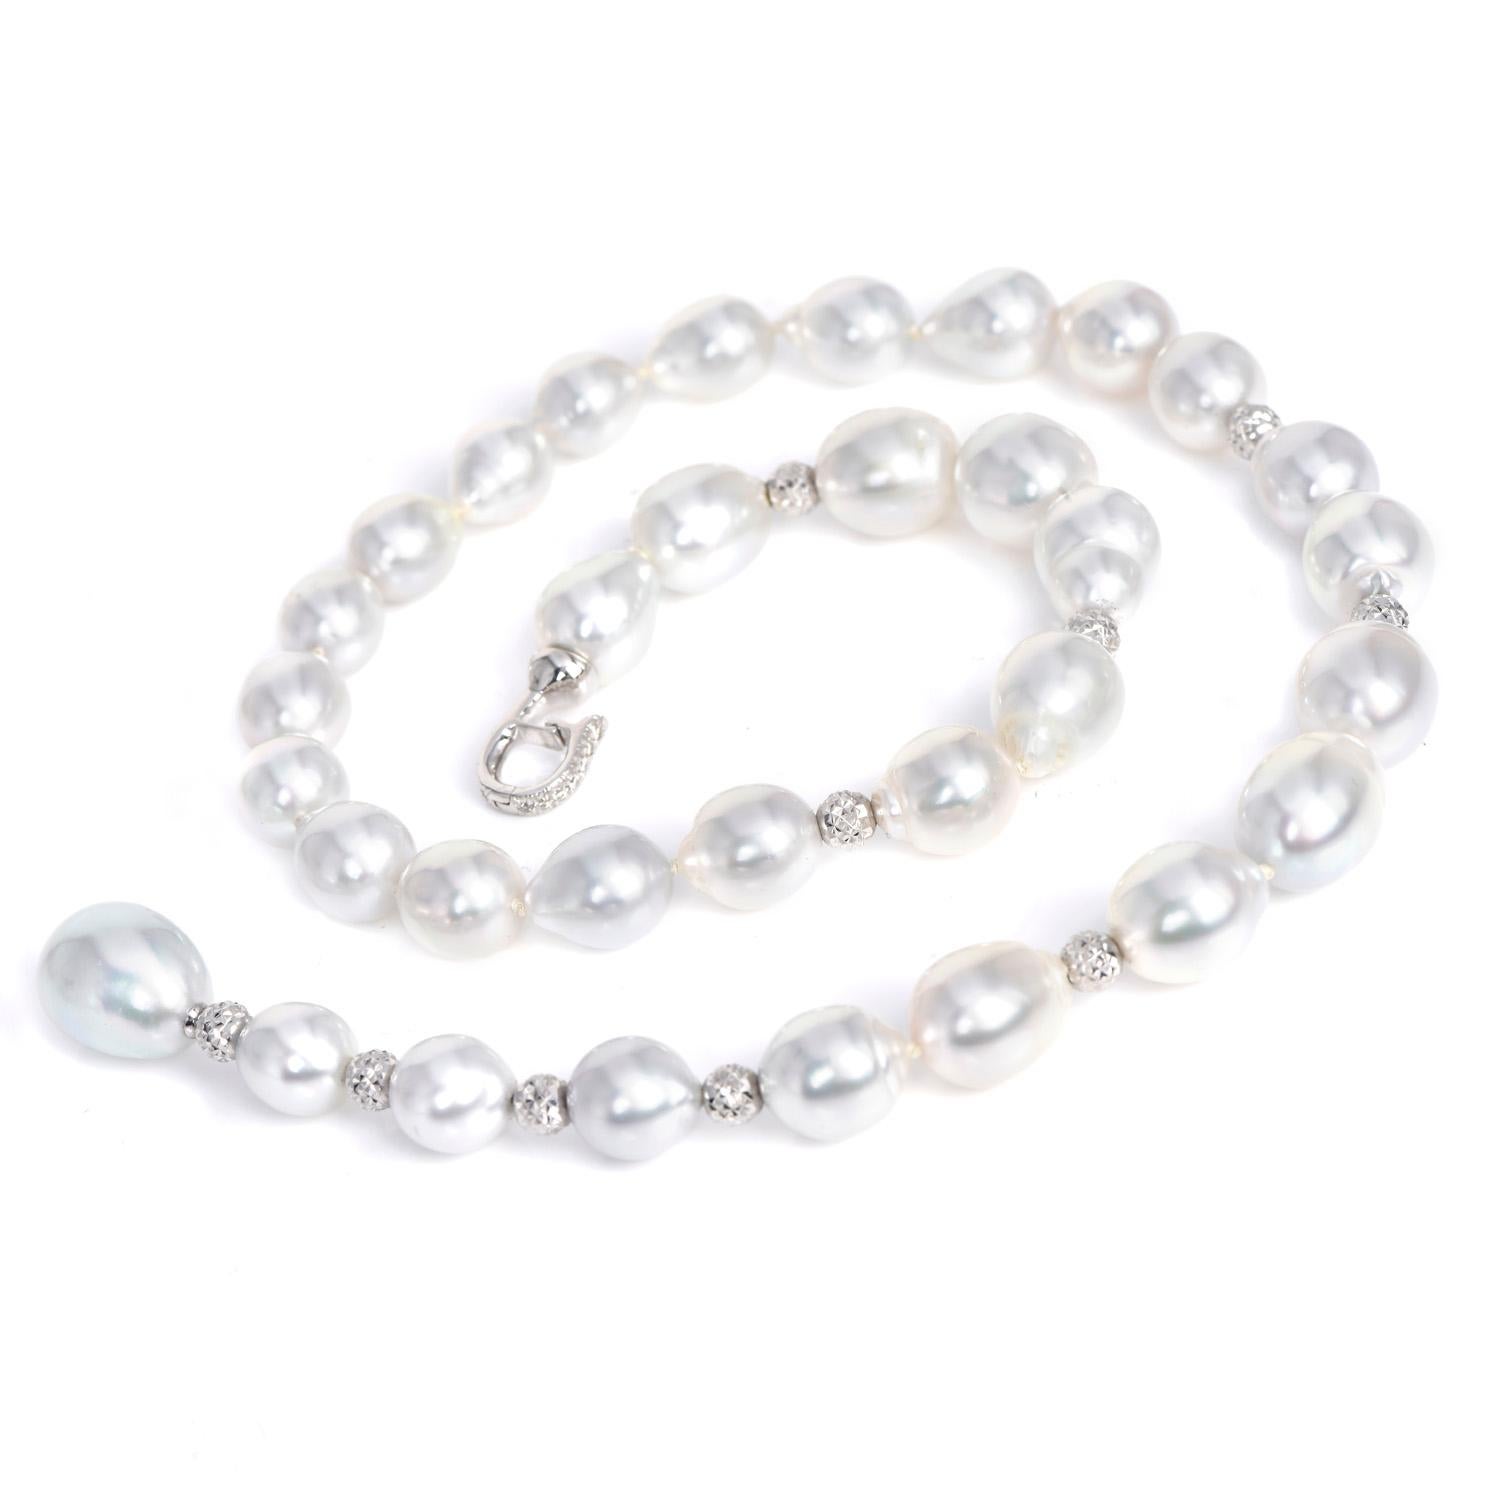 High Luster Metallic Gray Semi Baroque Pearls Adorning a strand of 18K Gold Beads with an adjustable Clasp.

Its clasp has (7) Round Cut Genuine Diamonds, prong-set, weighing approximately 0.12 carats, H-I  Color & VS Clarity.

this piece is formed